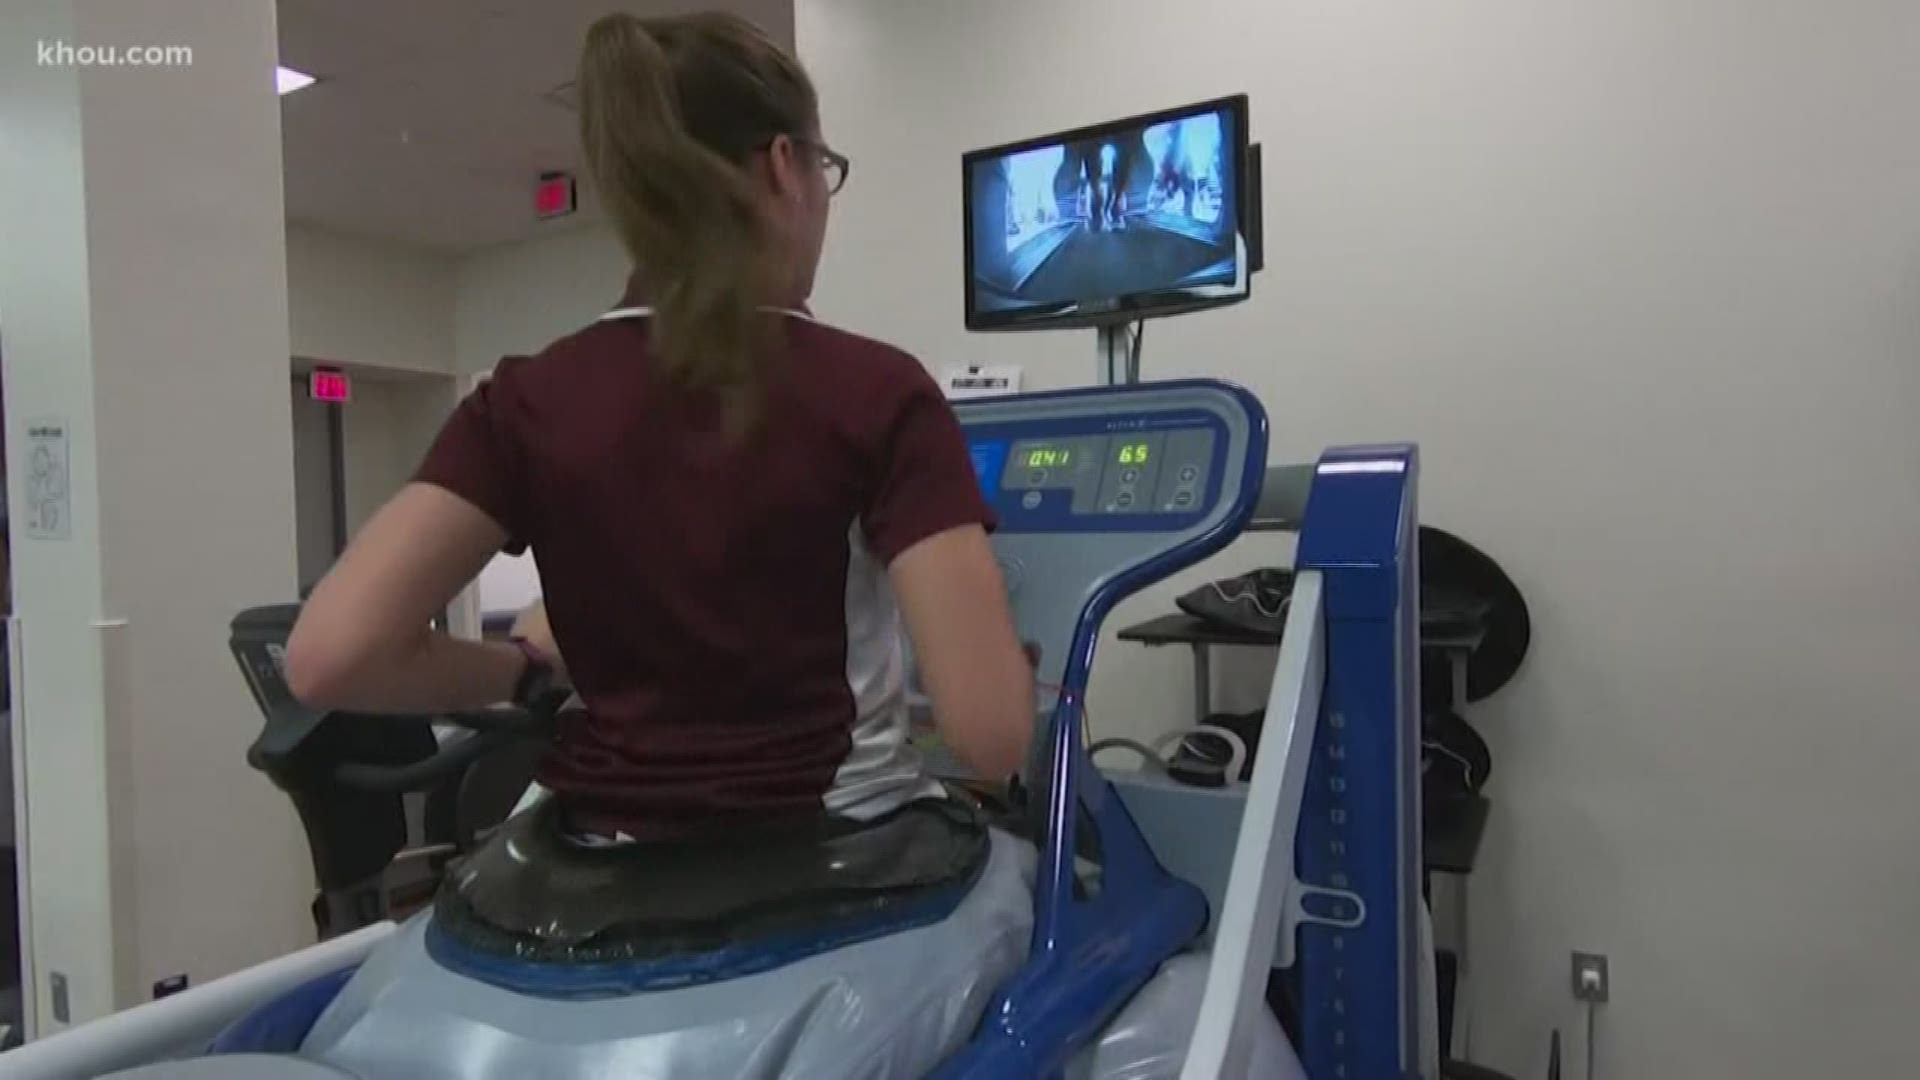 If you've ever gone for a run, you know it can take a lot out of you. Some of us even end up with serious injuries. But now there's all sorts of technology to help us bounce back like the zero-gravity treadmill at UTMB in Galveston.